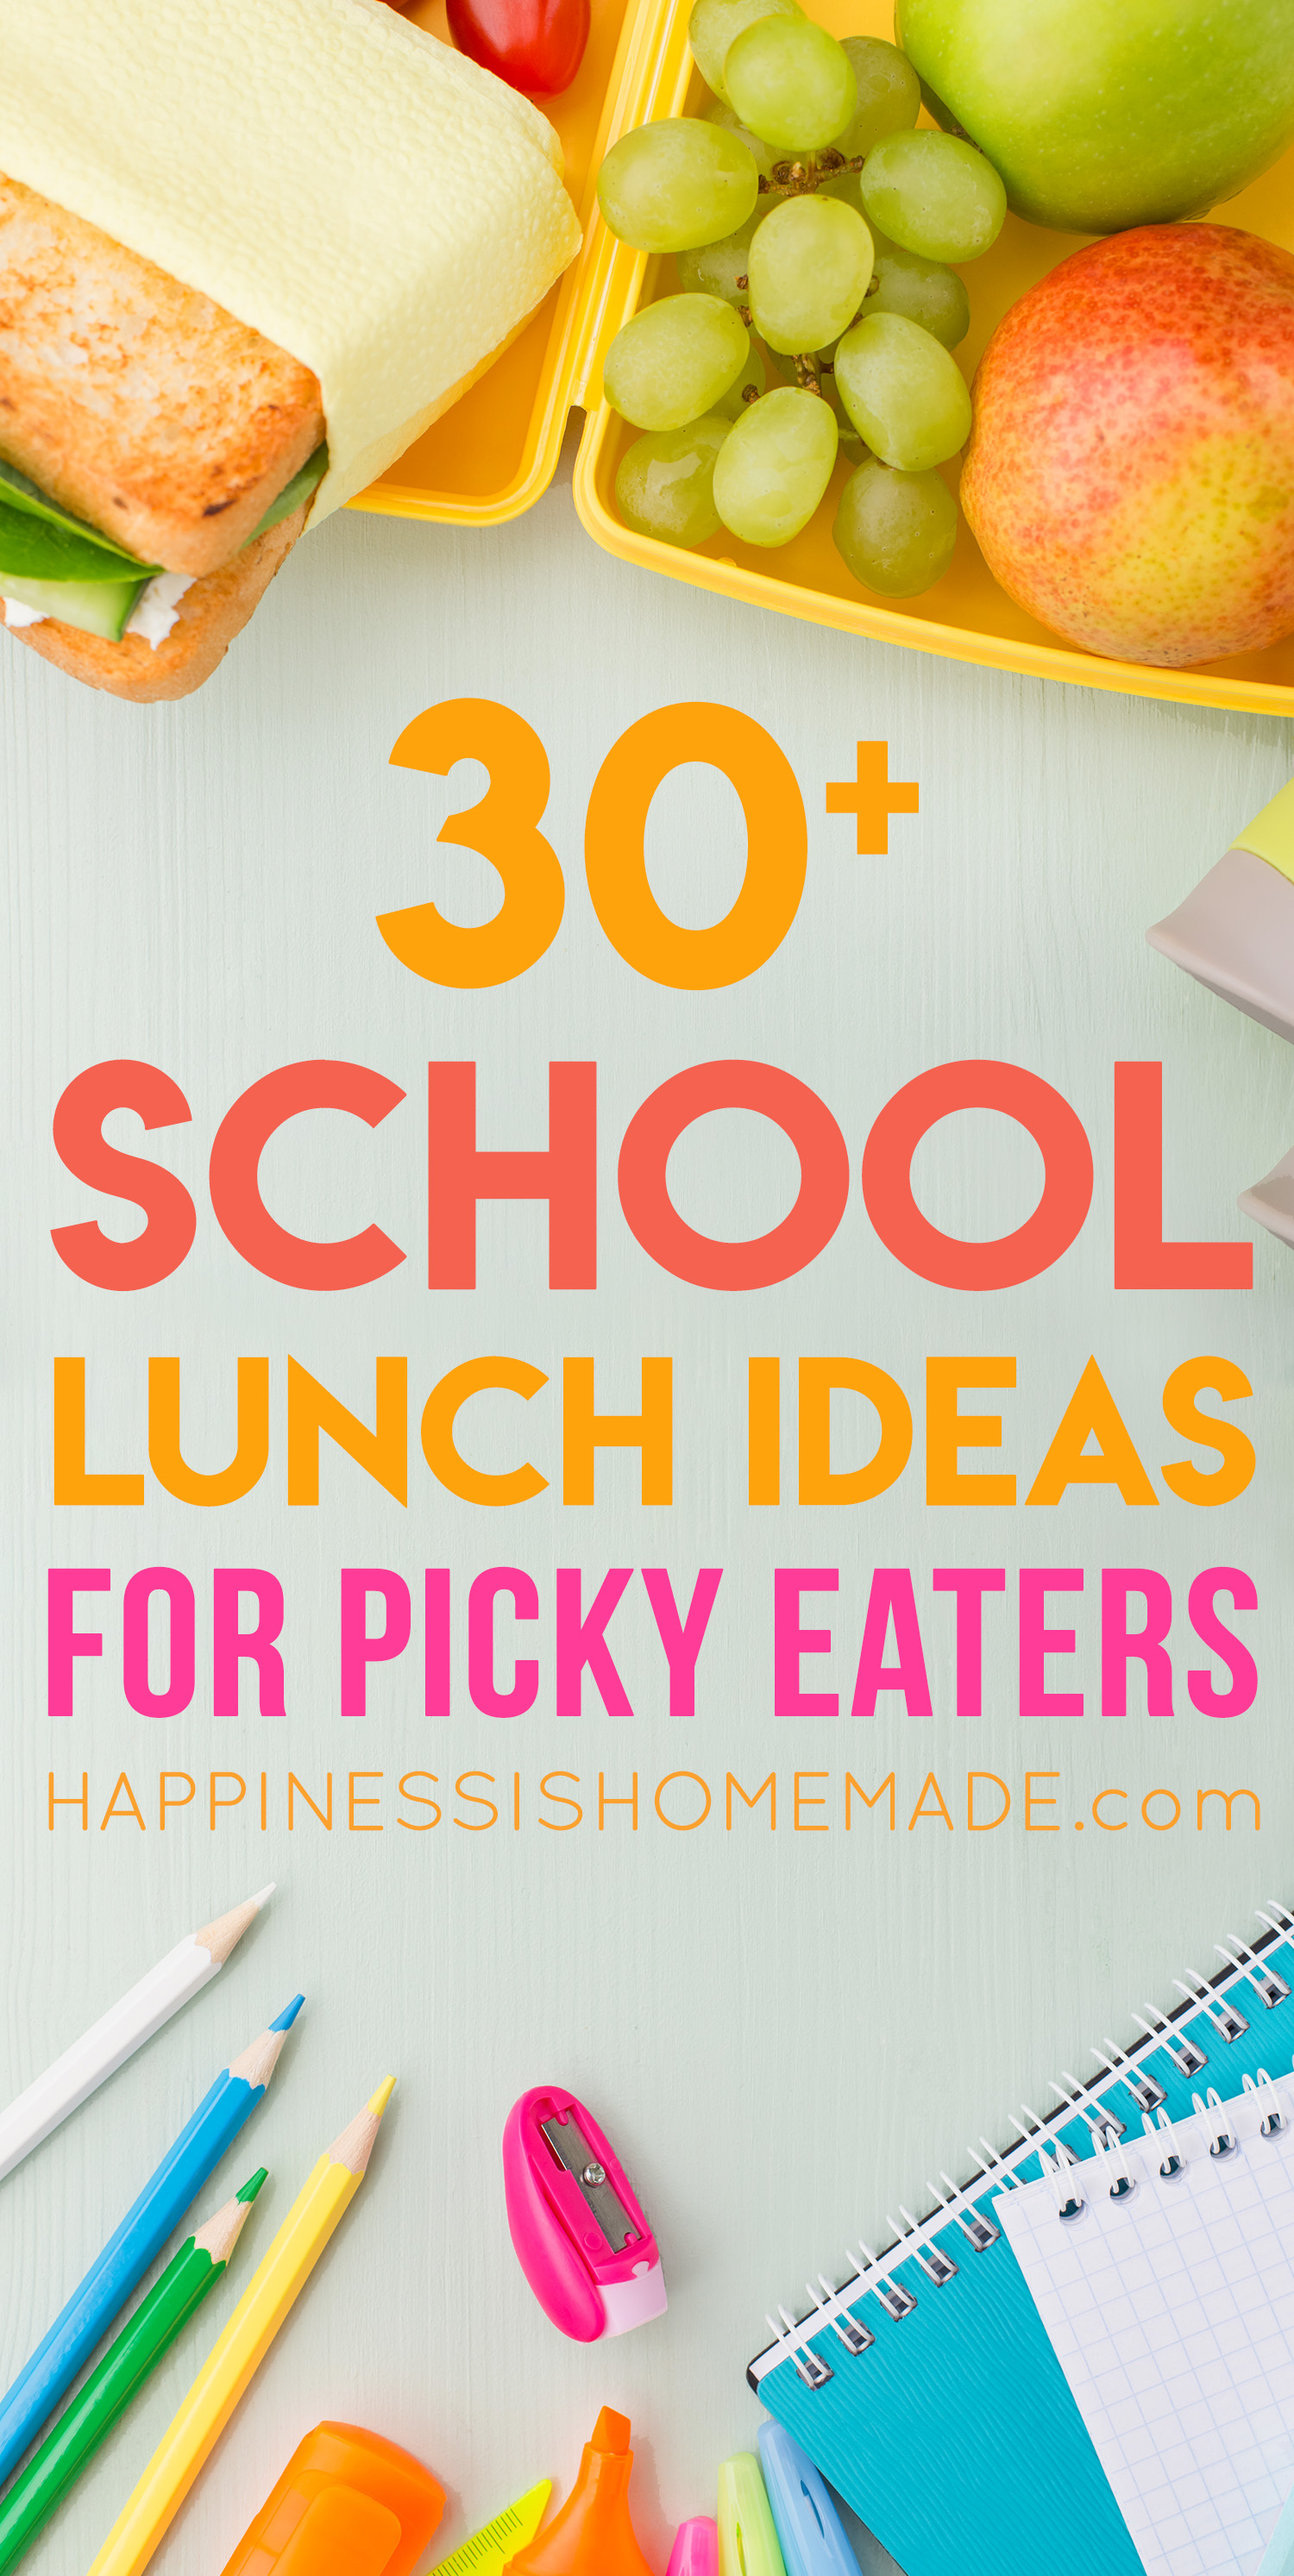 30+ School Lunch Ideas for Picky Eaters - Happiness is Homemade